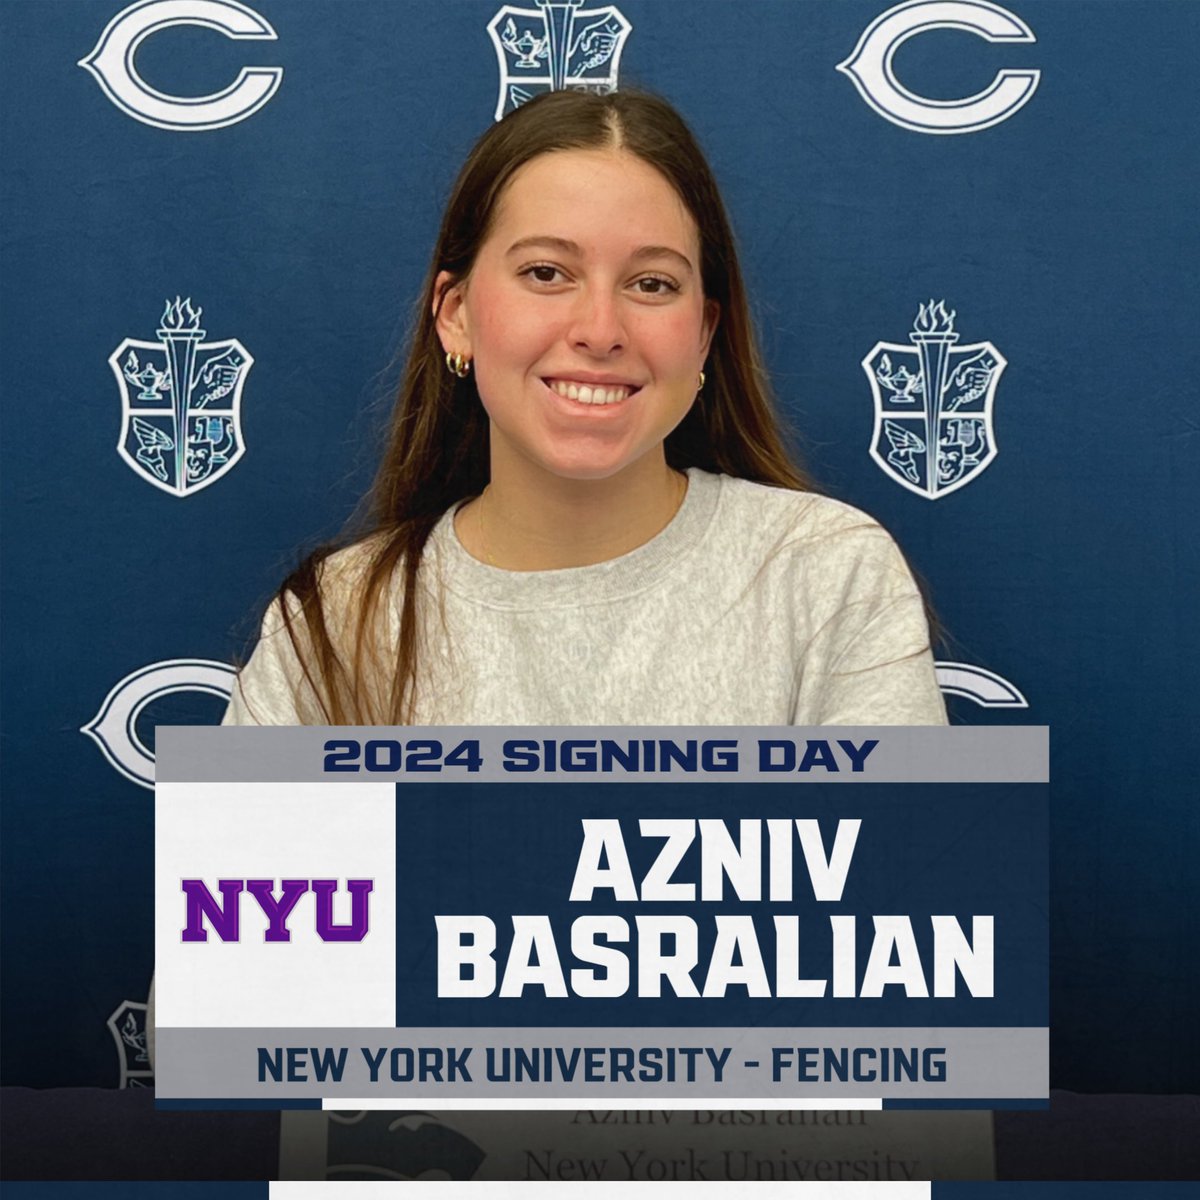 Congratulations to Azniv Basralian who has committed to compete in fencing for NYU next year! Best of Luck as you continue your athletic career! @ChathamCougars @Athletics_CHS @ChathamsTAP @dailyrecordspts @ChathamCourier1 @ChathamHS @NYUAthletics